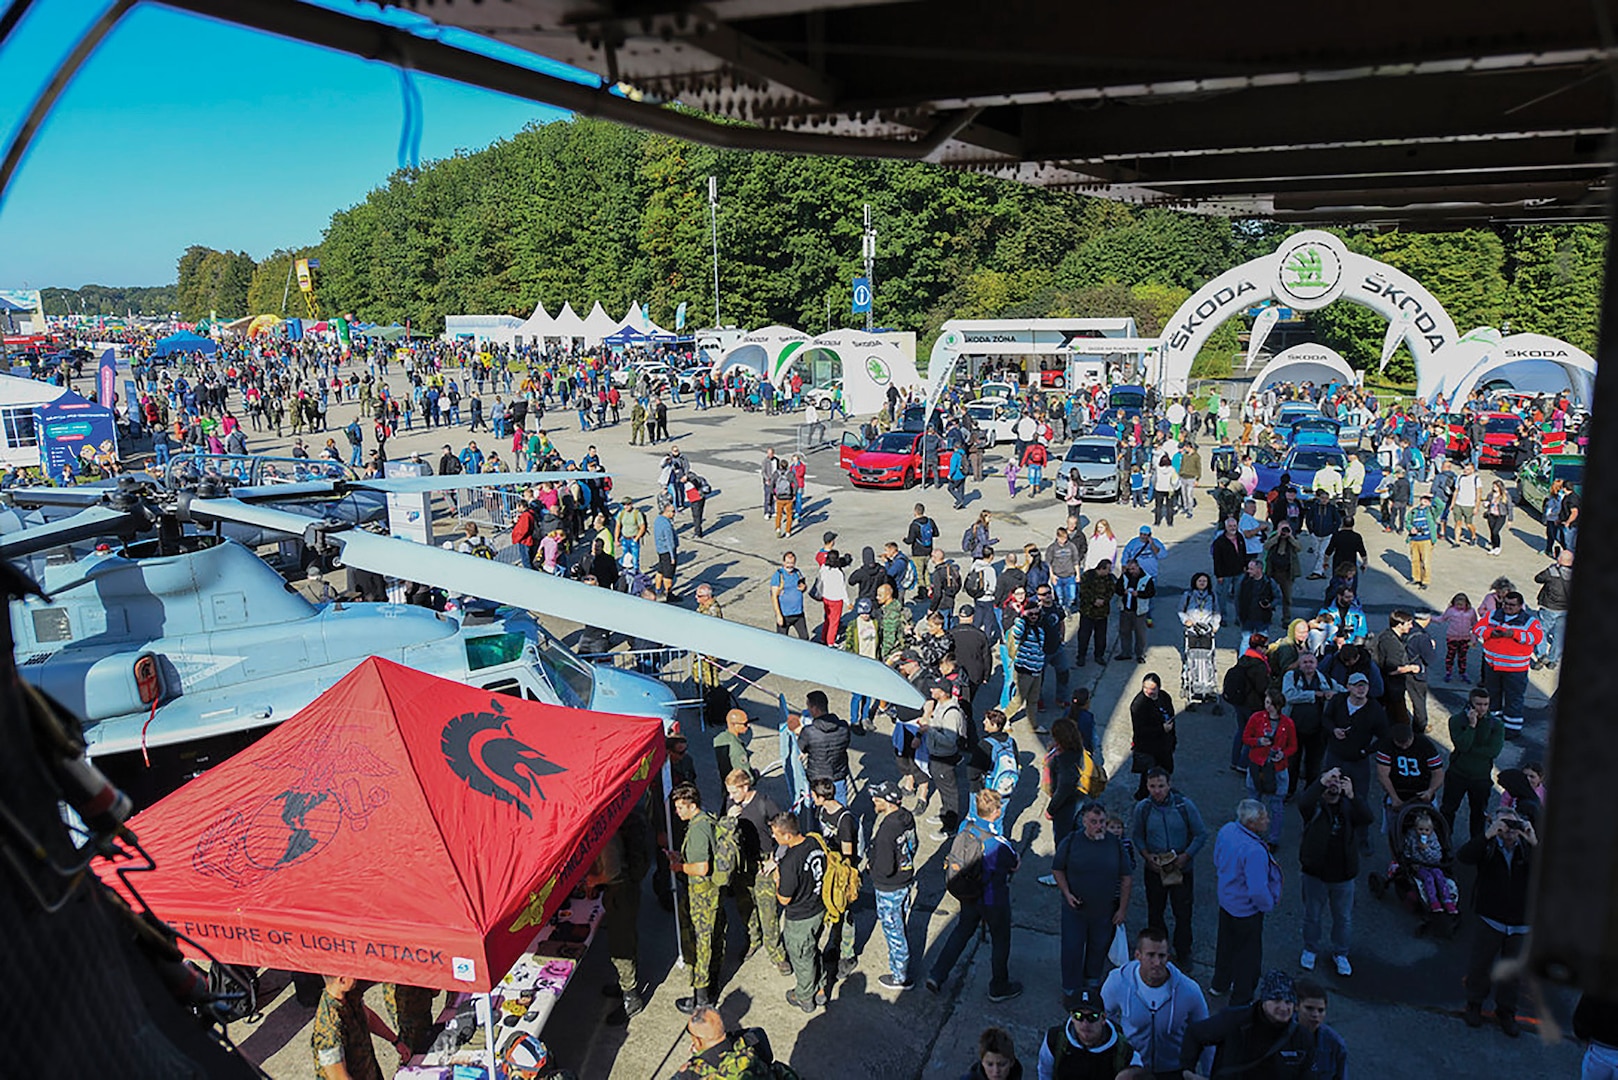 2019 NATO Days strengthen alliances, partnerships; Ostrava, Czech Republic, 21 September 2019, attended by over
200,000 thousand visitors. (U.S. Air Force photo by Senior Airman Alexandria Lee)